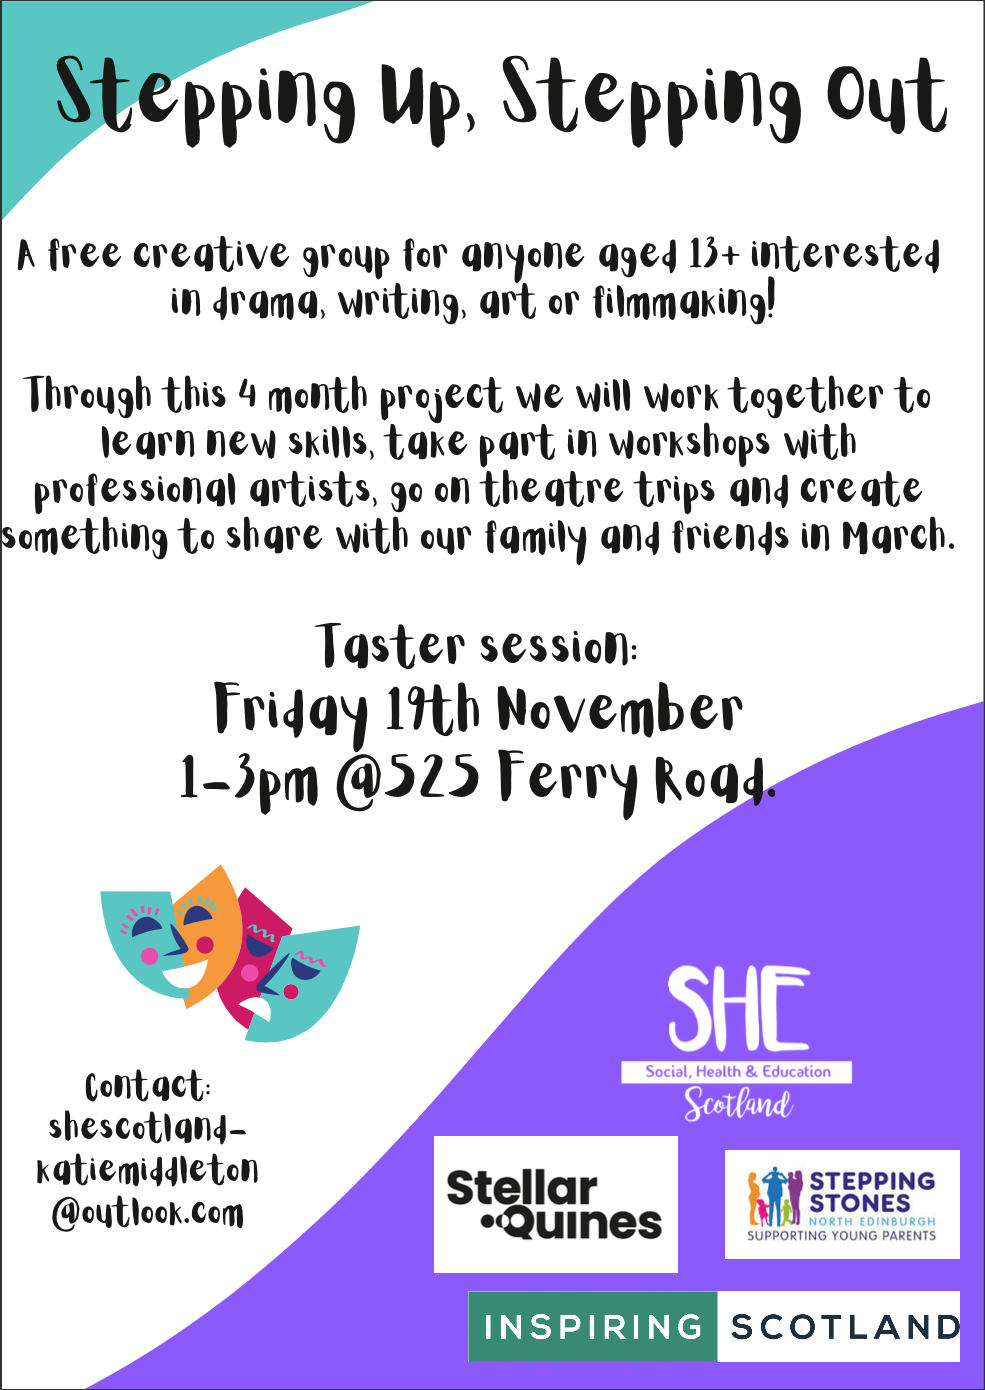 A free creative group for anyone aged 13+ interested in drama, writing, art or filmmaking - Taster Session Friday 19th of November, 2021 1-3pm at525 Ferry Road